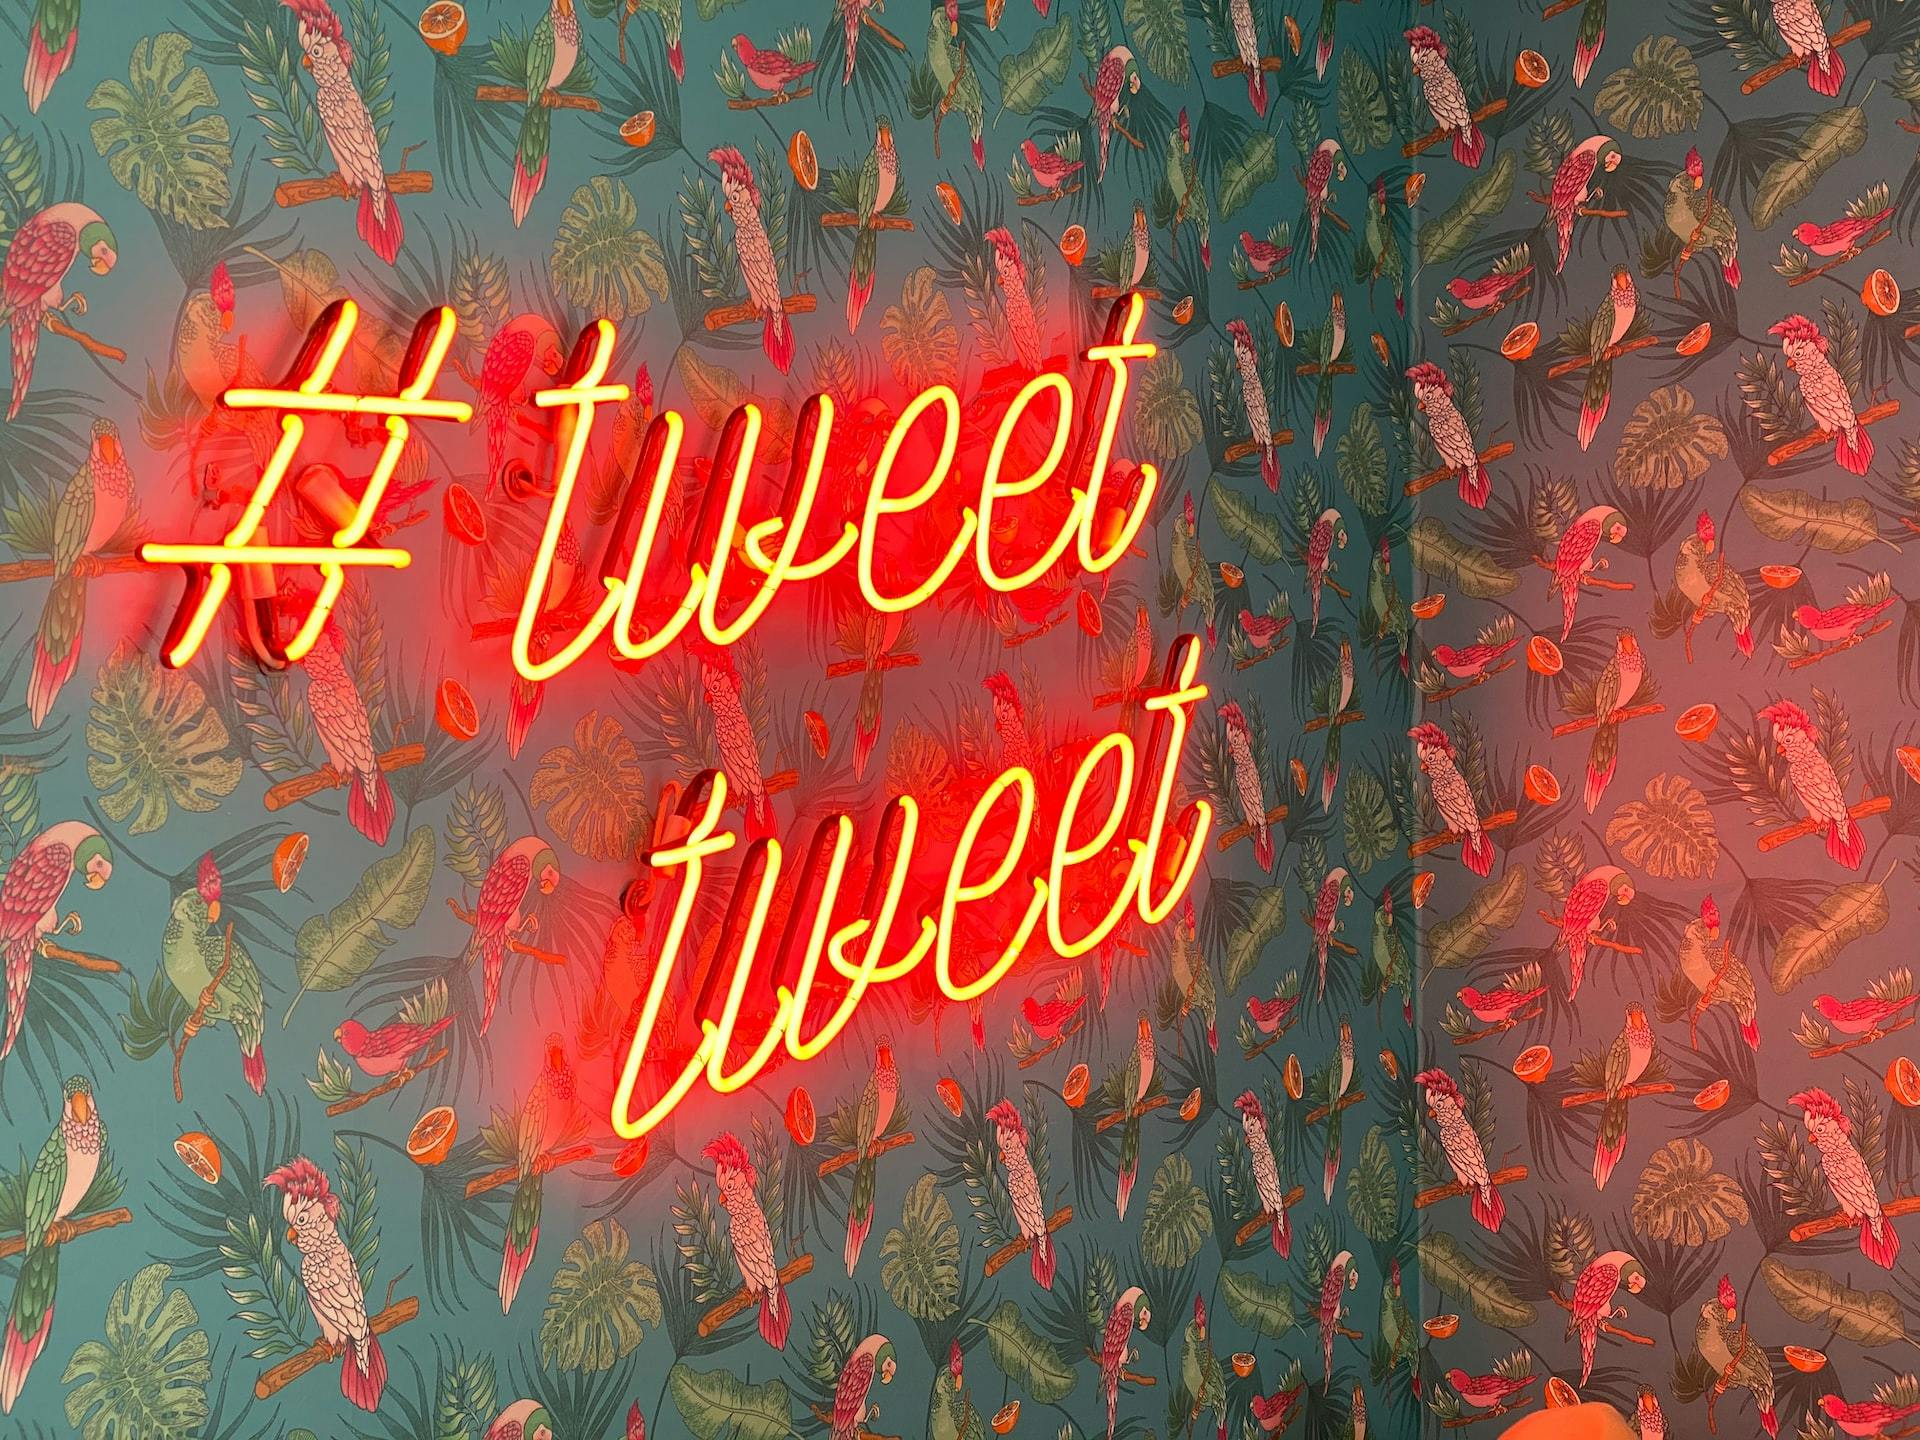 picture of a neon light that says hashtag tweet tweet